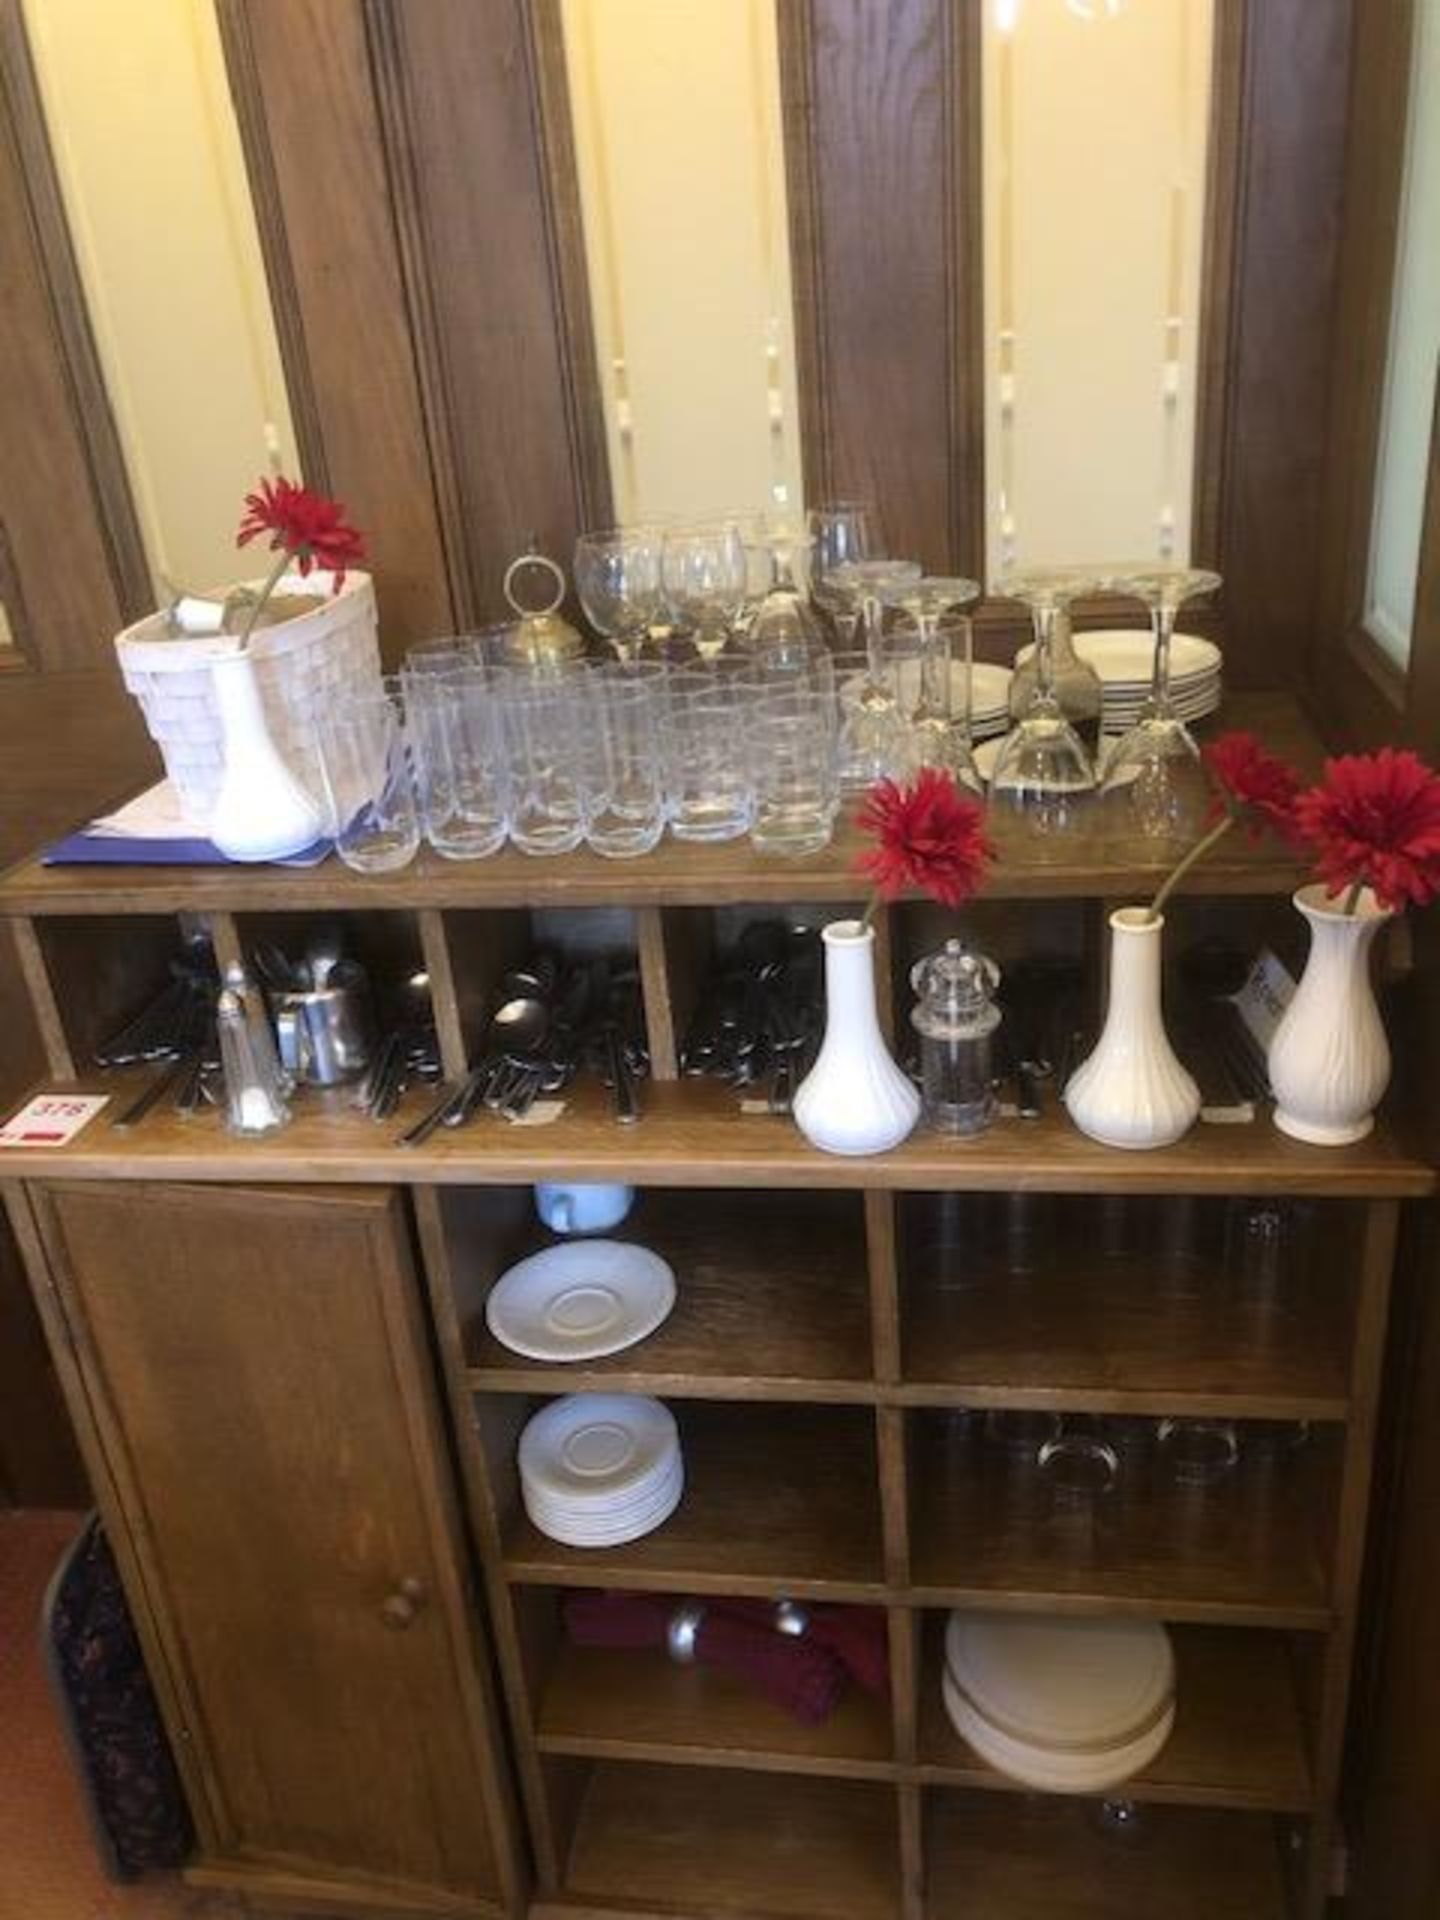 Wooden dumb waiter c/w contents to include glasses, cutlery, plates etc., as lotted